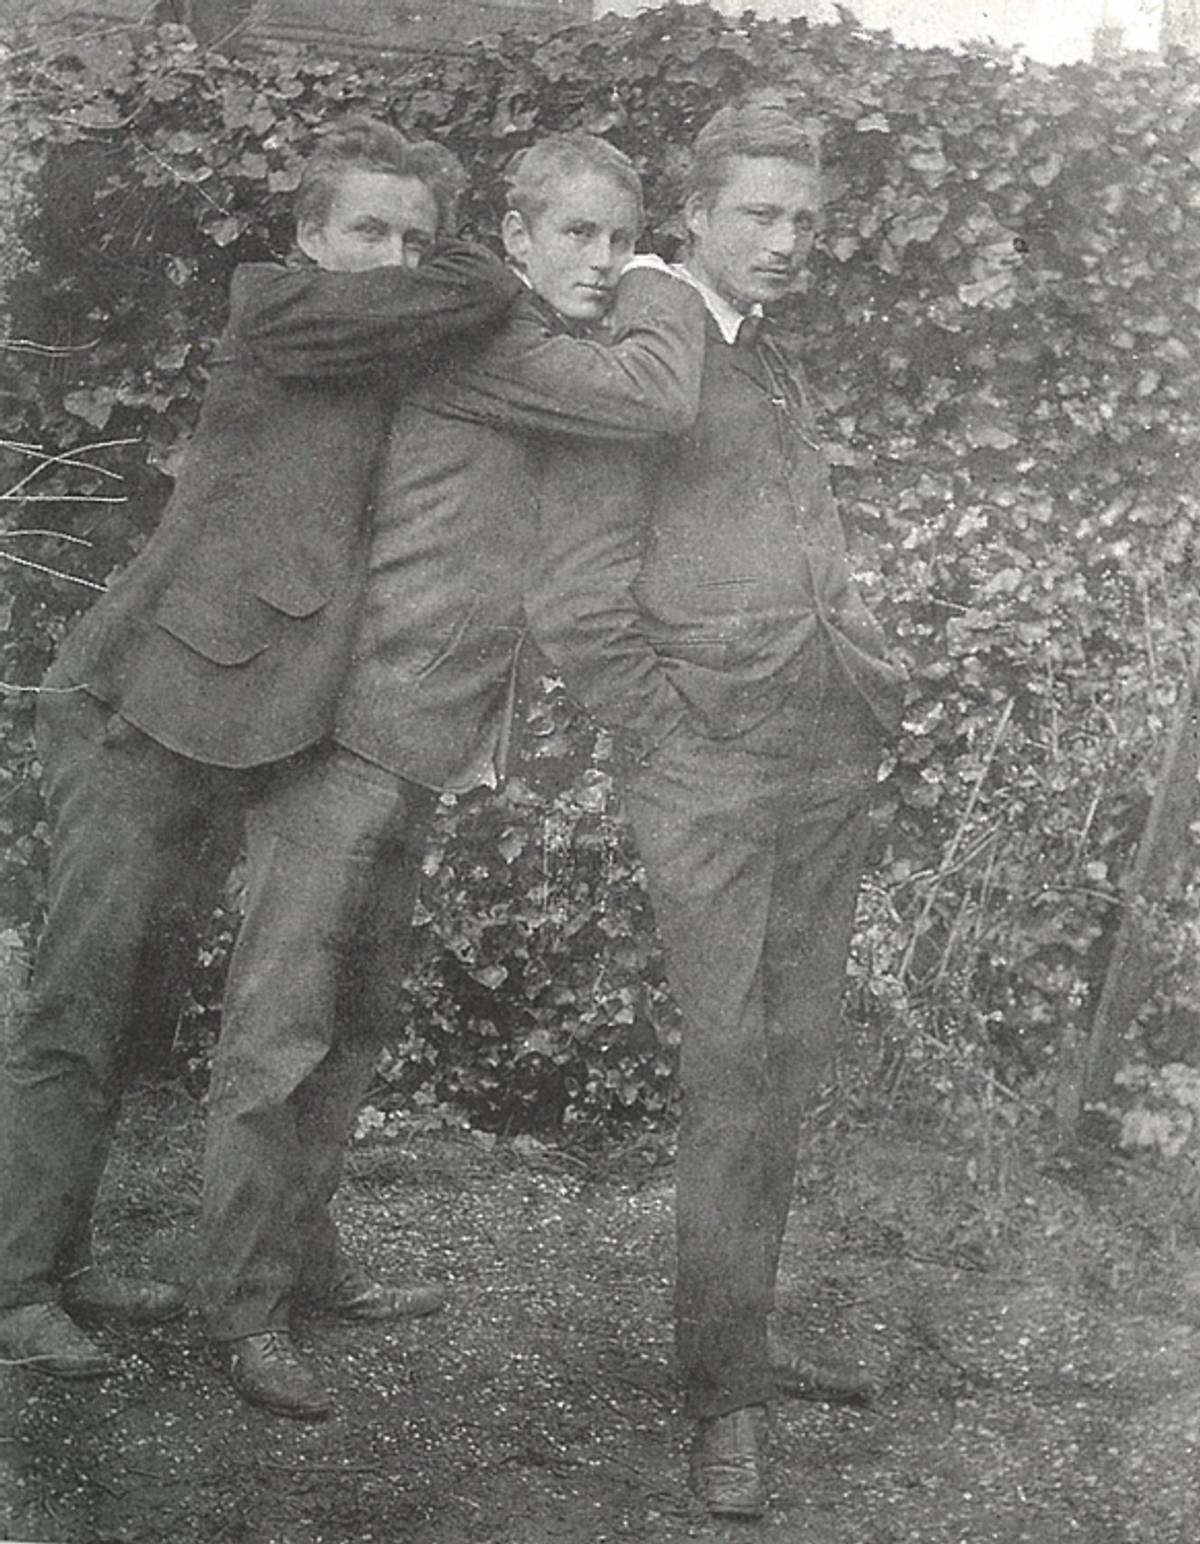 L.E.J. Brouwer (right) with his brothers, date unknown. (Nationale bibliotheek van Nederland)